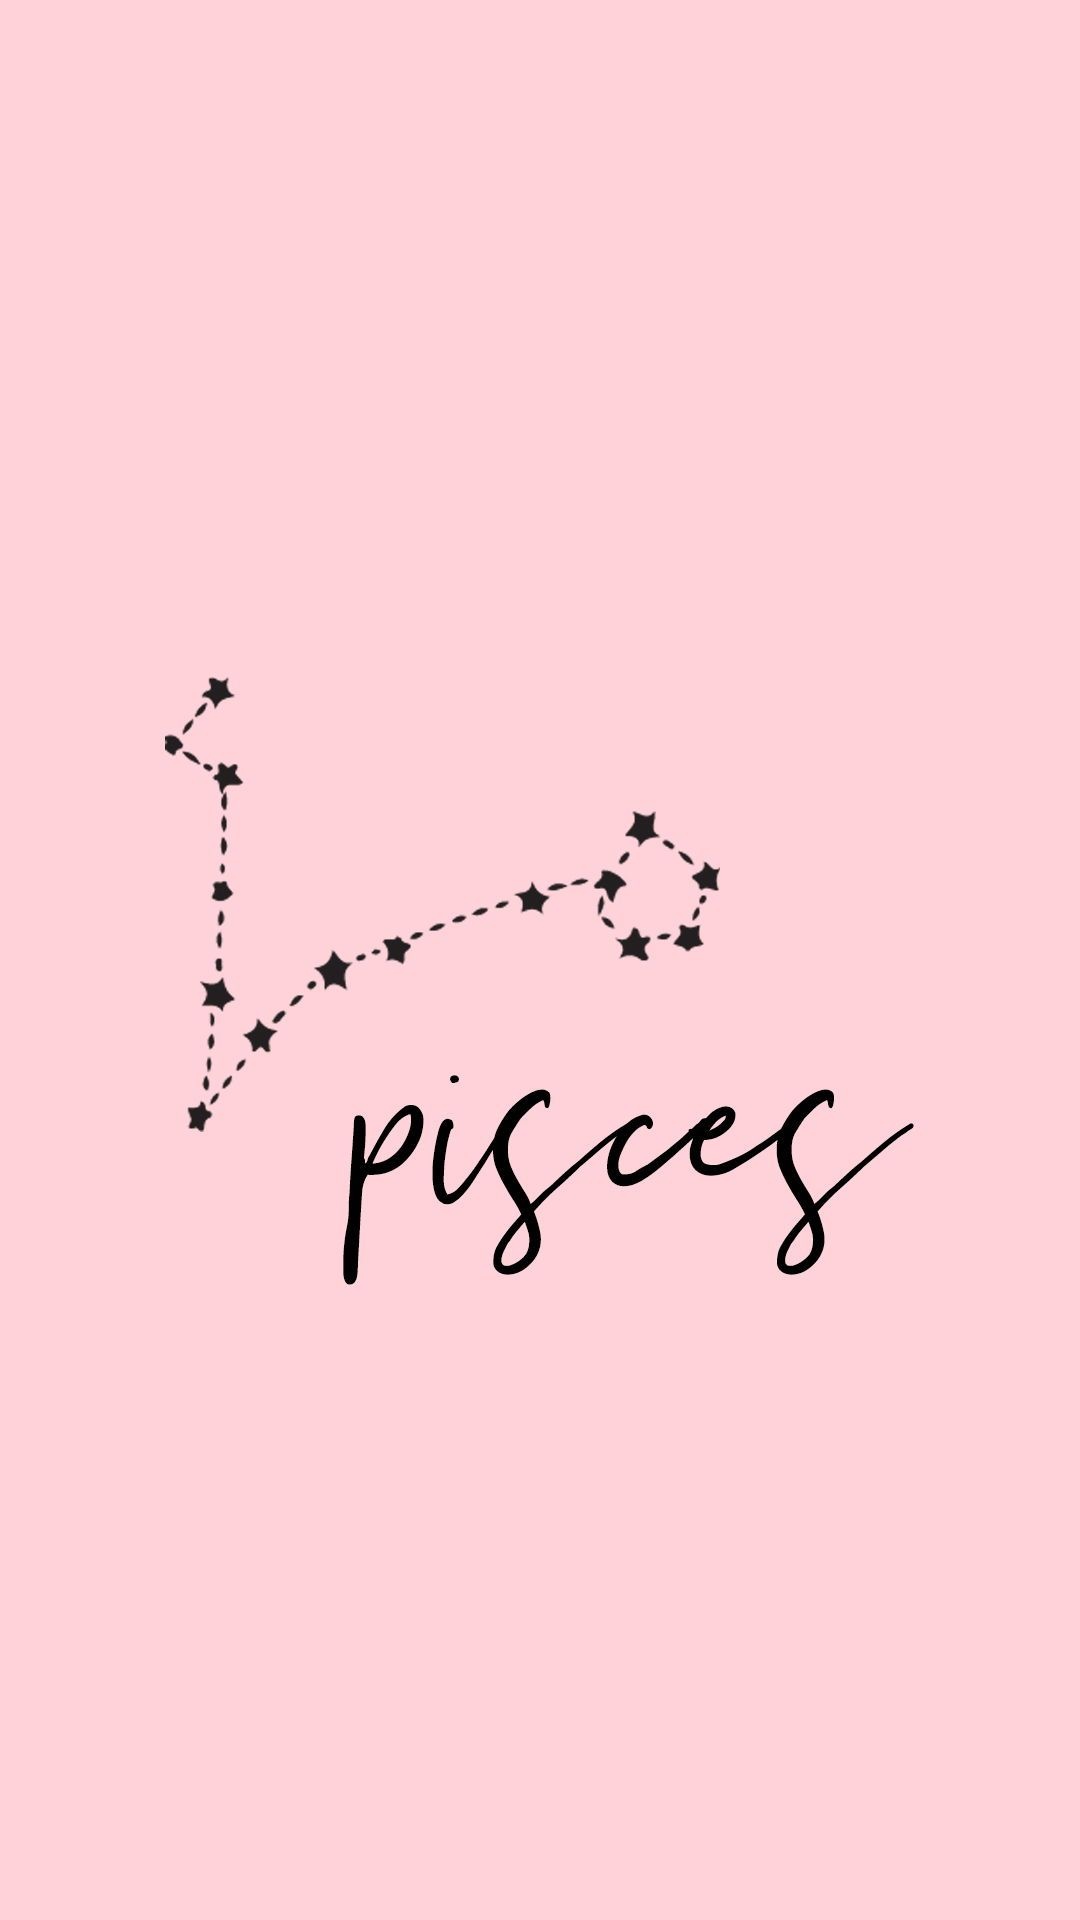 HD wallpaper, Picture Collage Wall, Pisces Zodiac Sign, Cute Visuals, Samsung 1080P Pisces Zodiac Sign Wallpaper Image, 1080X1920 Full Hd Phone, Aesthetic Iphone Wallpapers